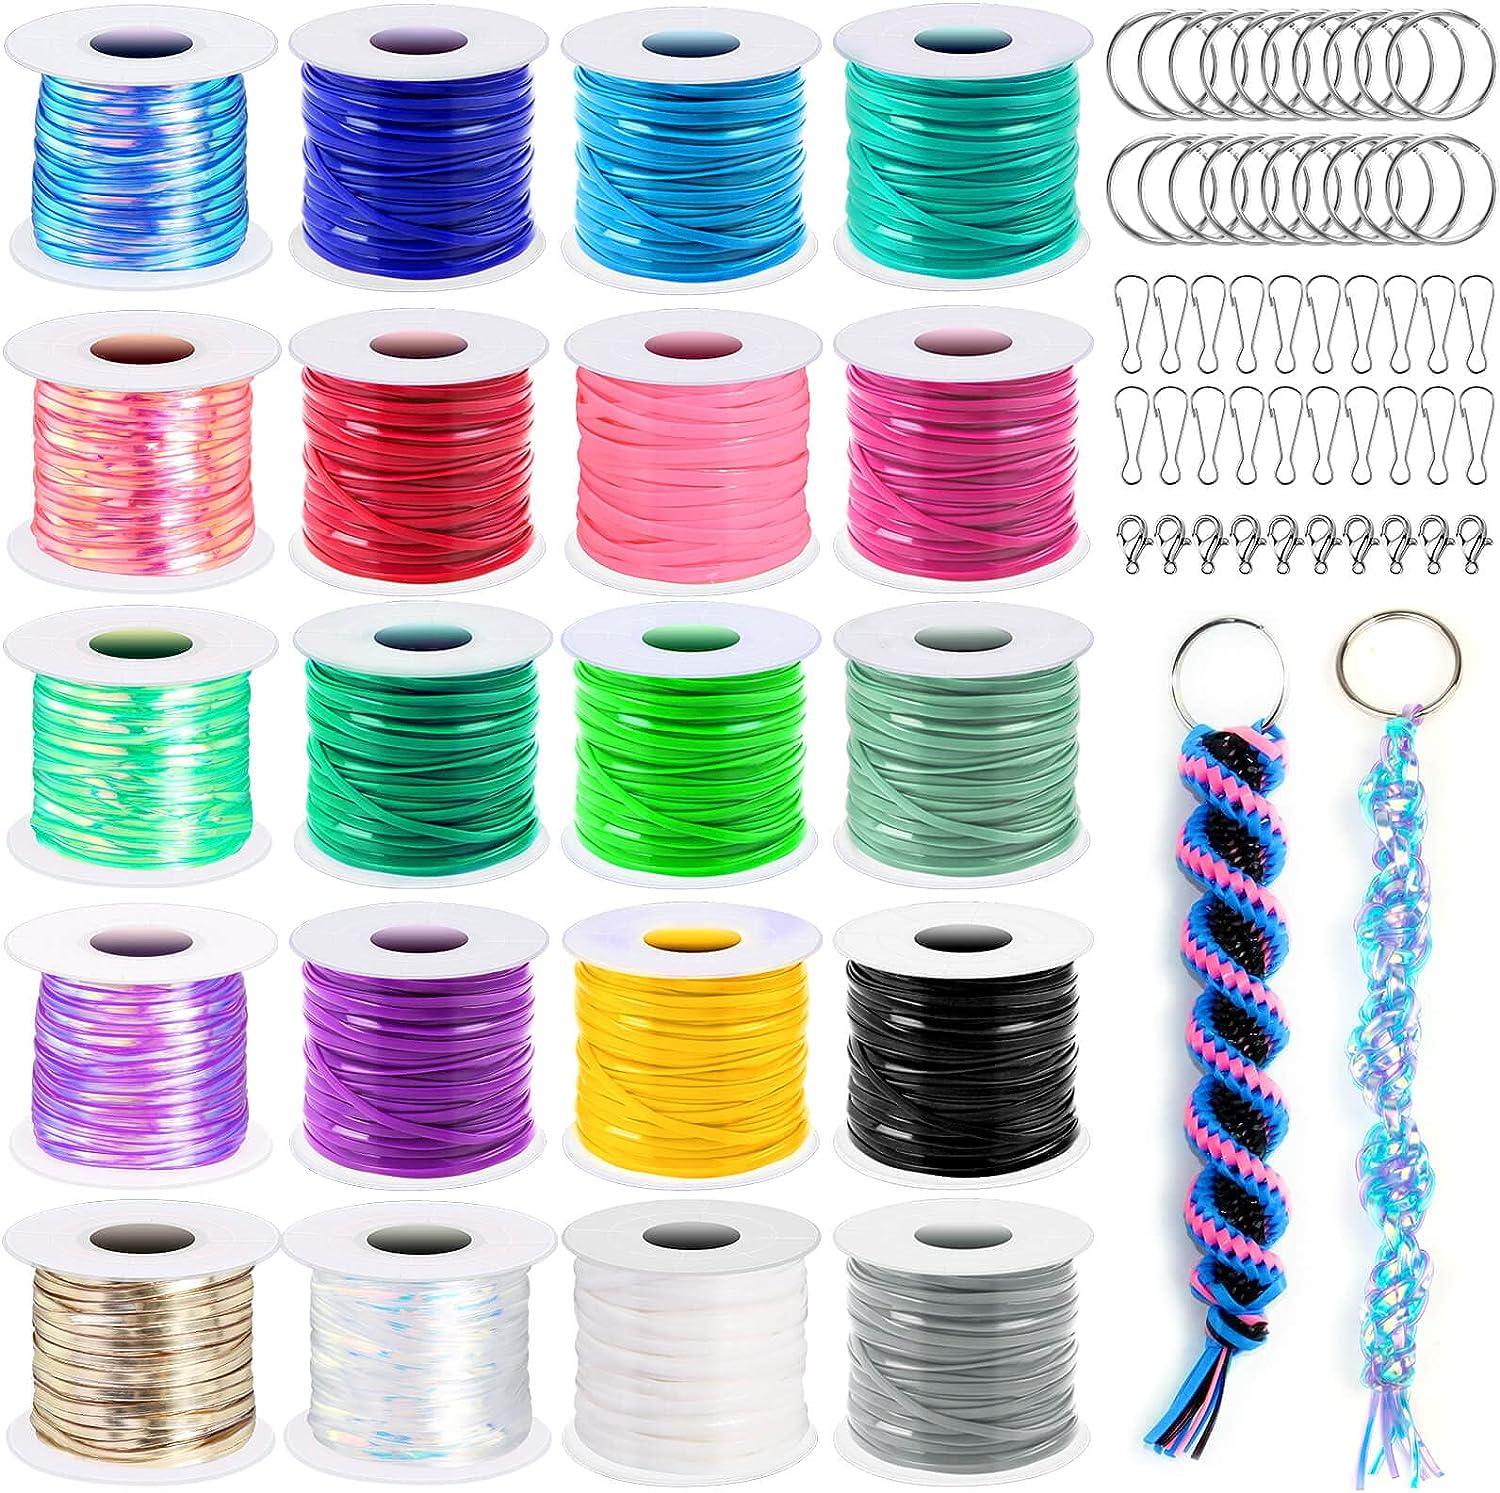 Plastic Lacing Cord - Lanyard String for Kids and Lebanon